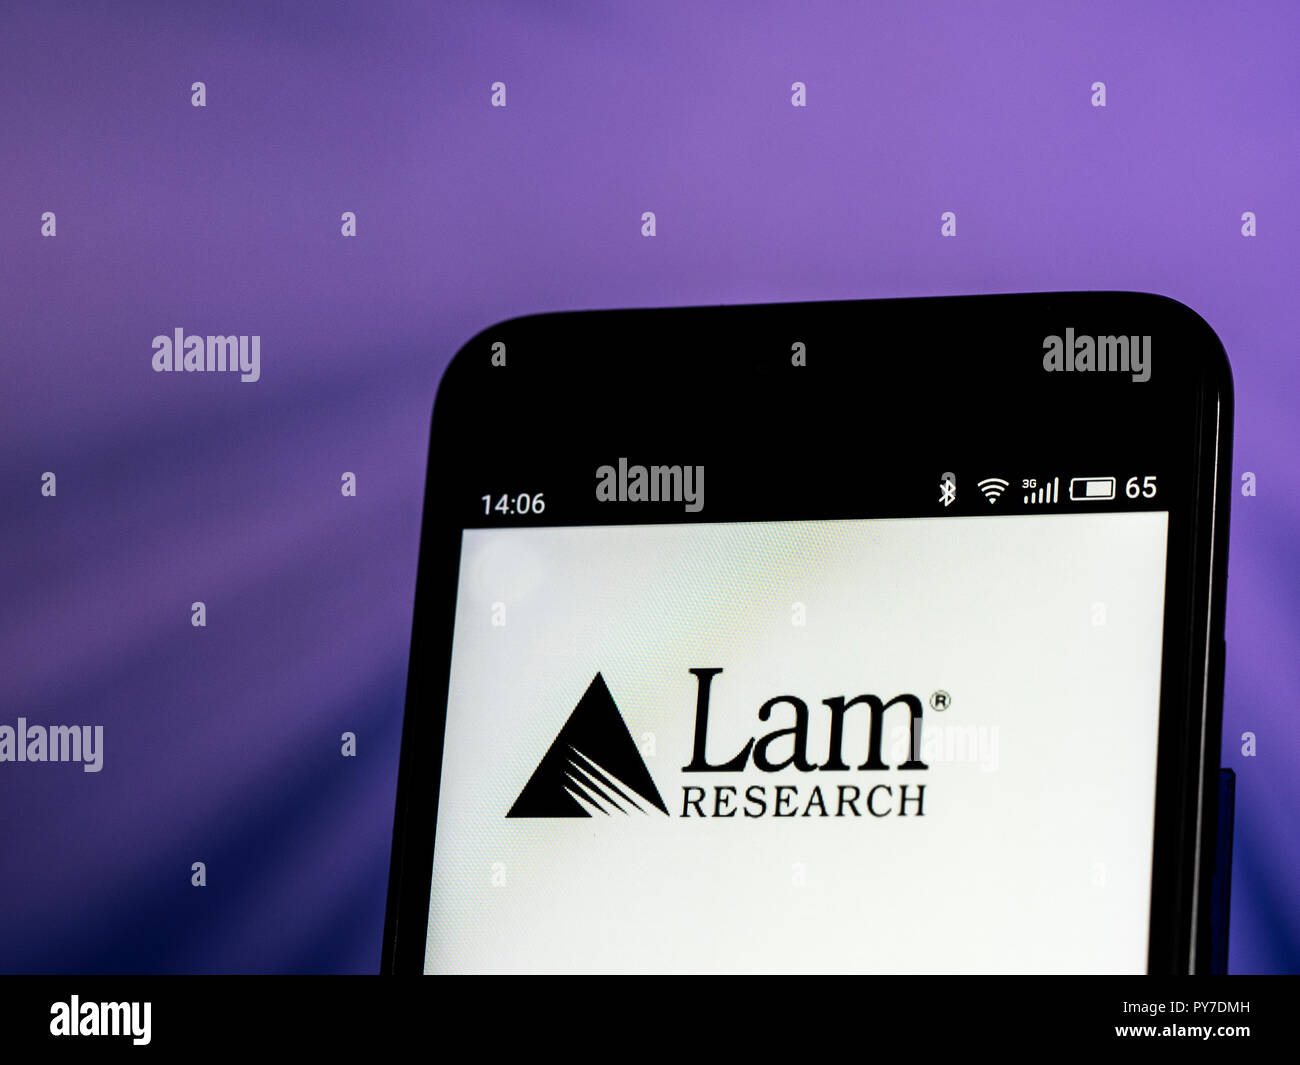 Lam Research Corporation logo seen displayed on smart phone. Lam Research Corporation is an American corporation that engages in the design, manufacture, marketing, and service of semiconductor processing equipment used in the fabrication of integrated circuits. Stock Photo